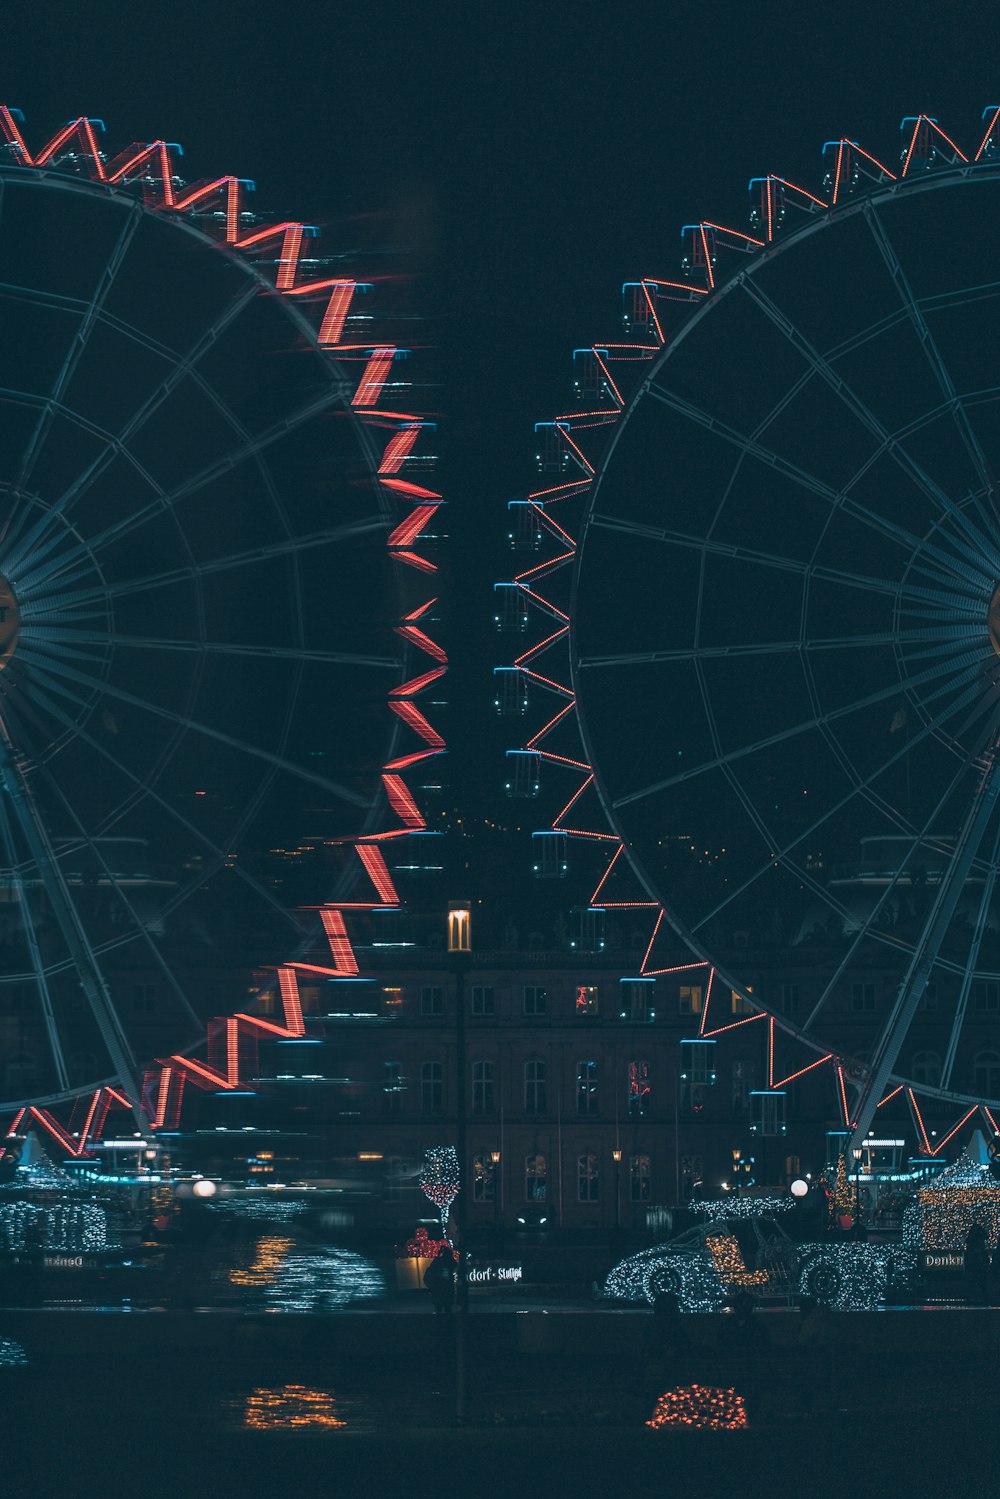 a large ferris wheel sitting next to a tall building